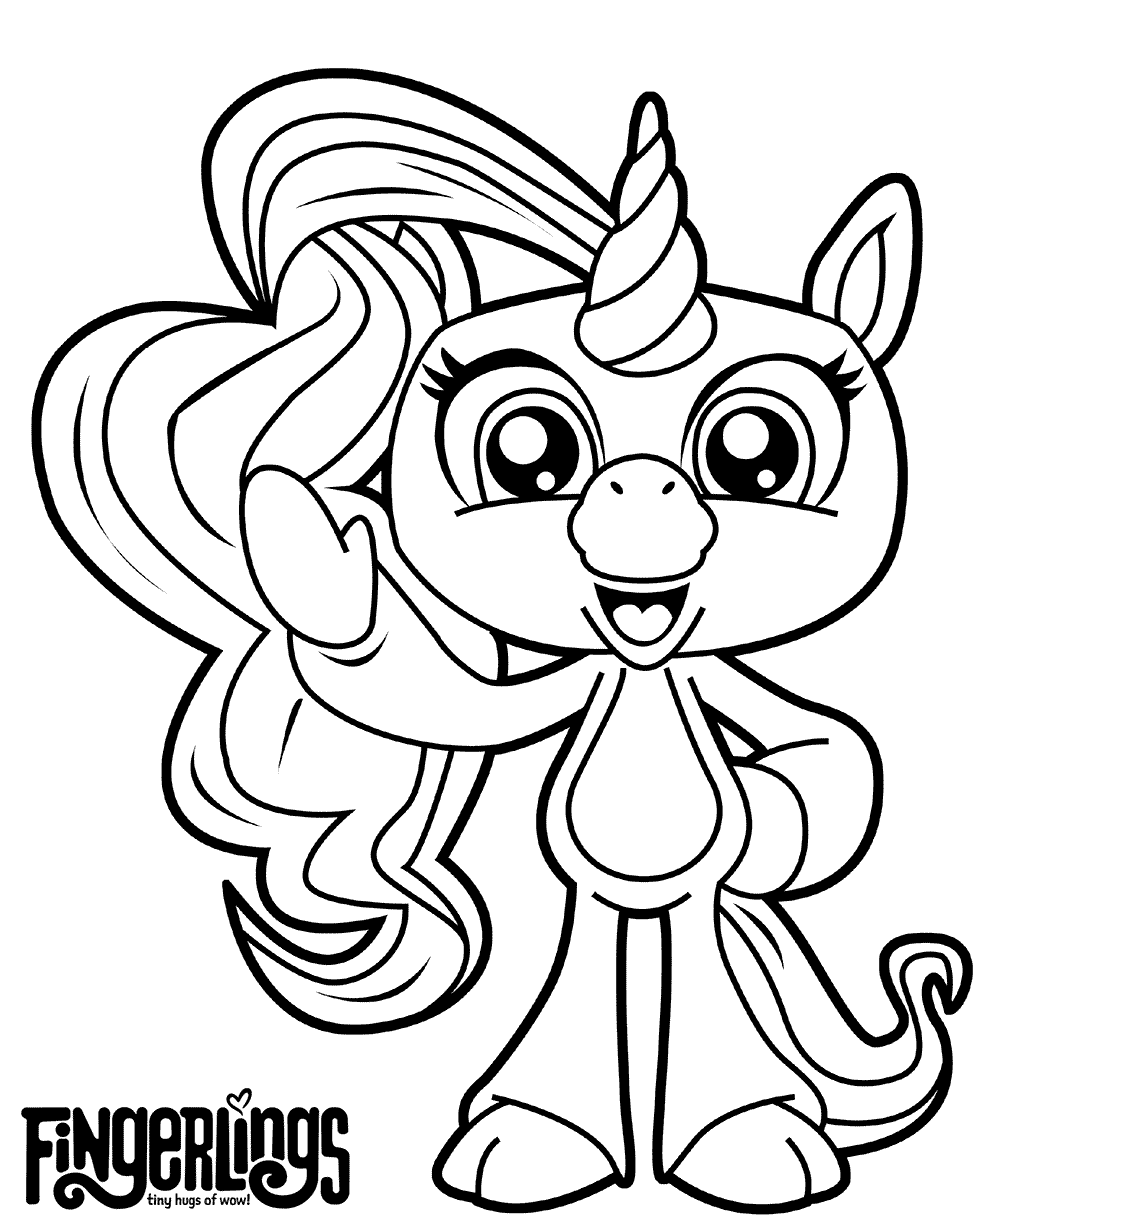 Printable Fingerlings Unicorn Coloring Page